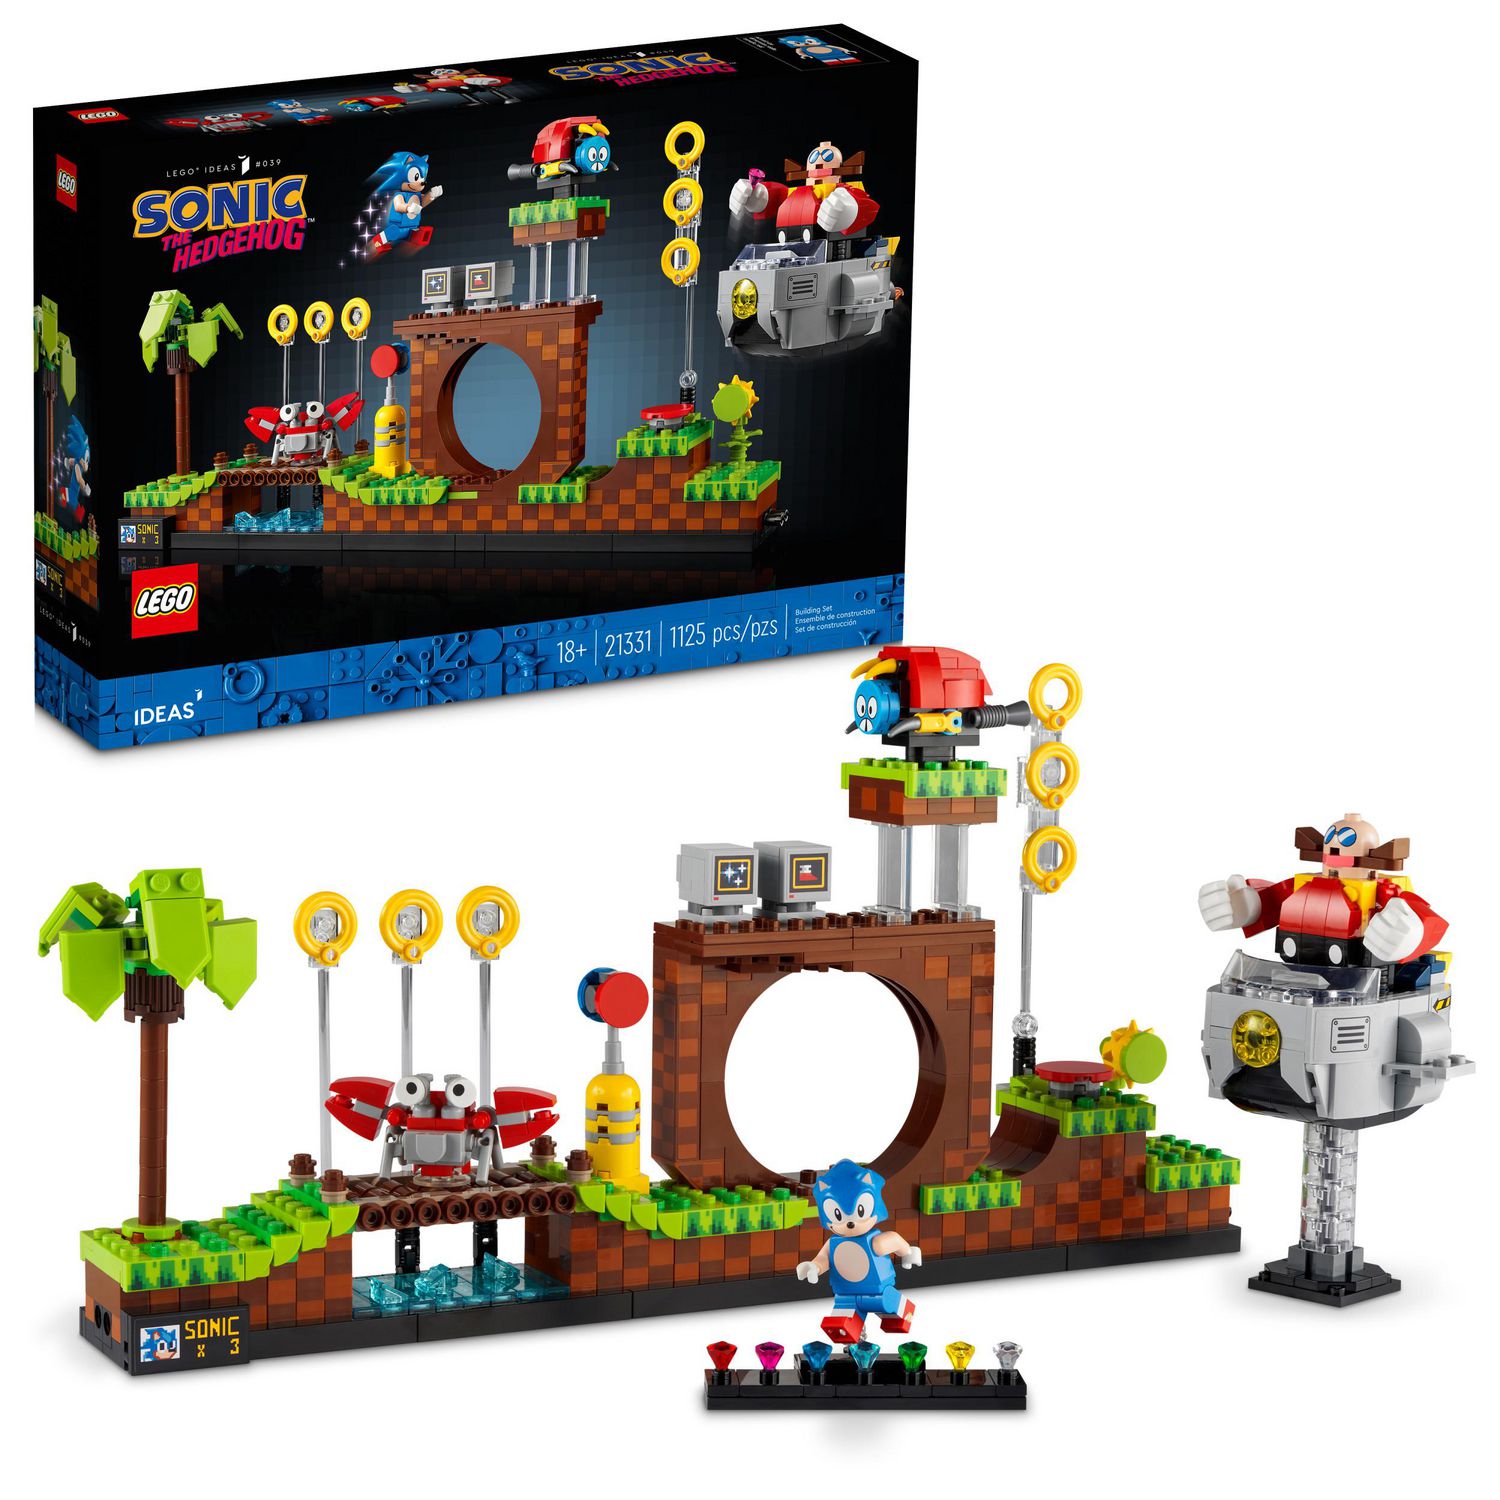 LEGO Ideas Sonic the Hedgehog – Green Hill Zone 21331 Toy Building